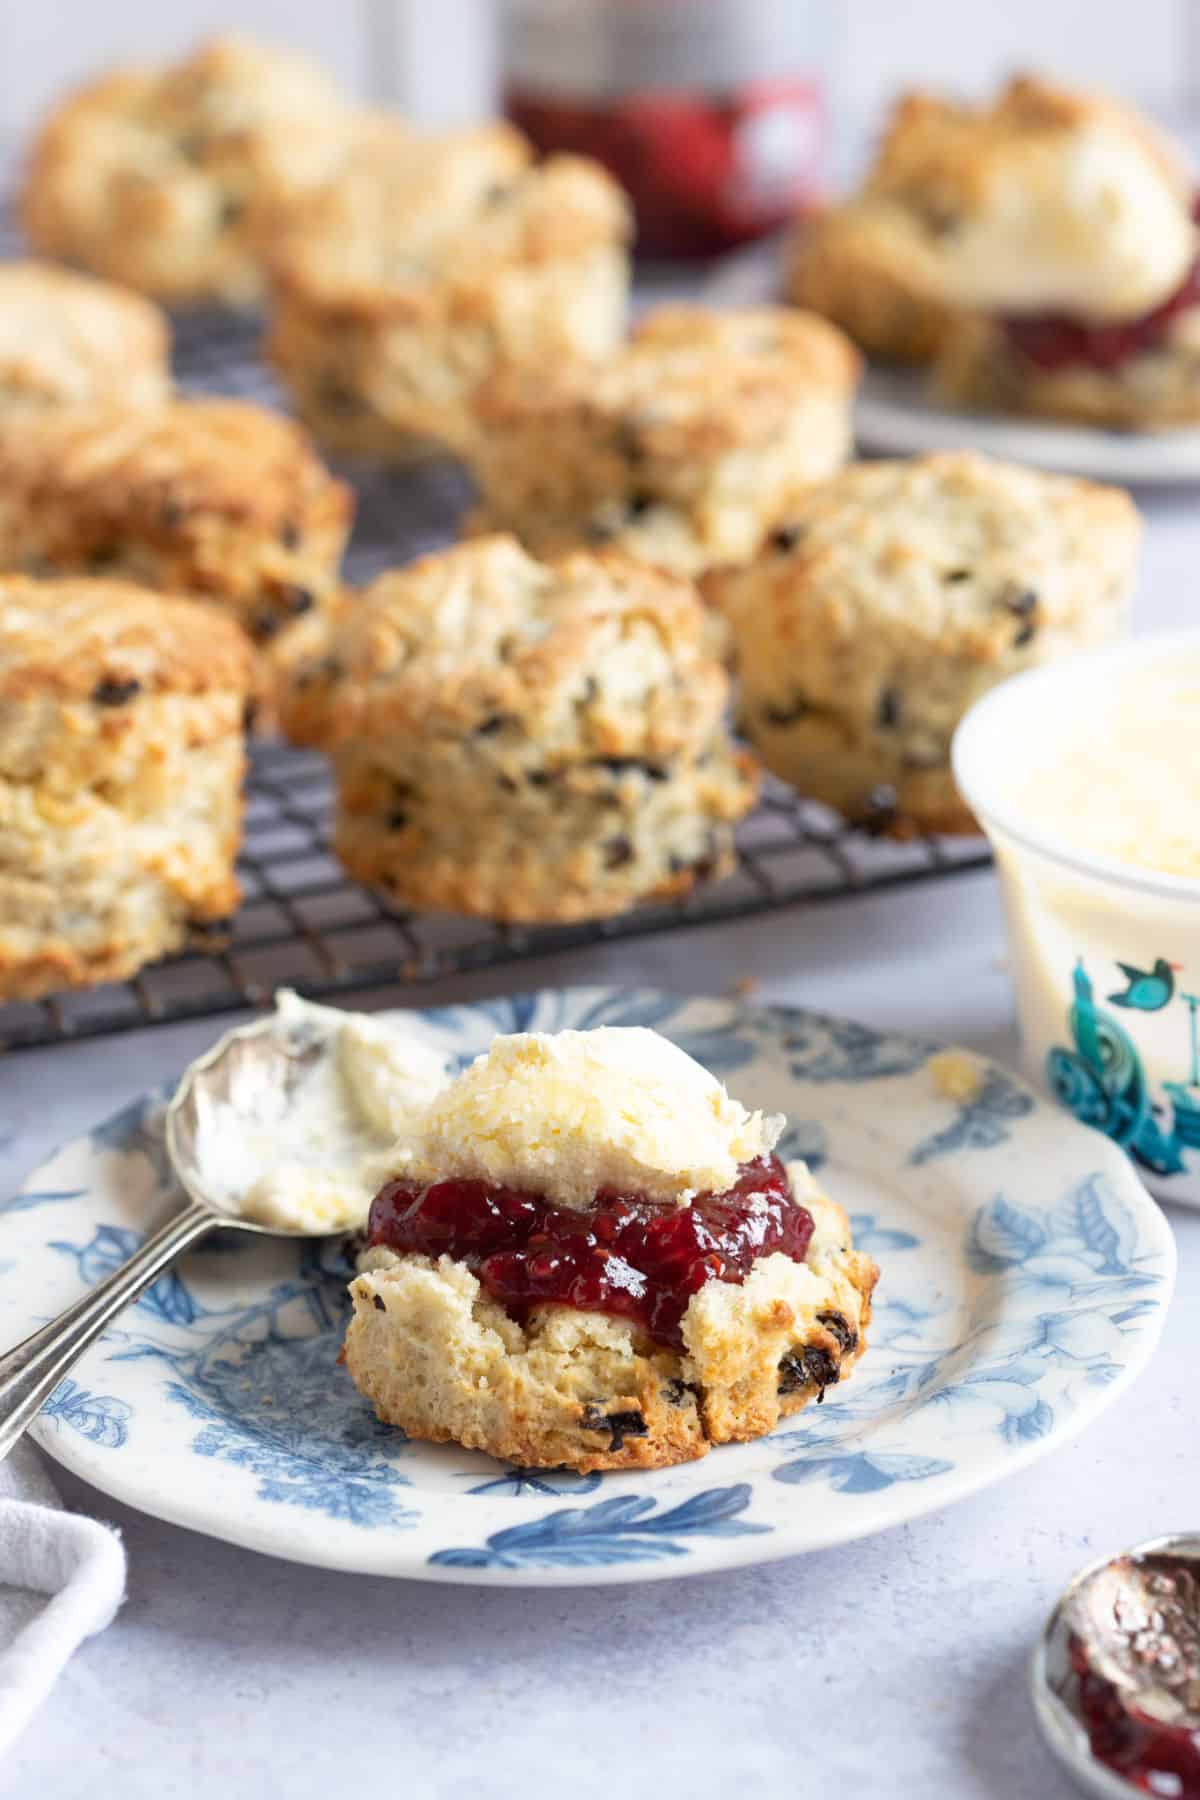 Fruit scone on a blue plate with jam and cream.